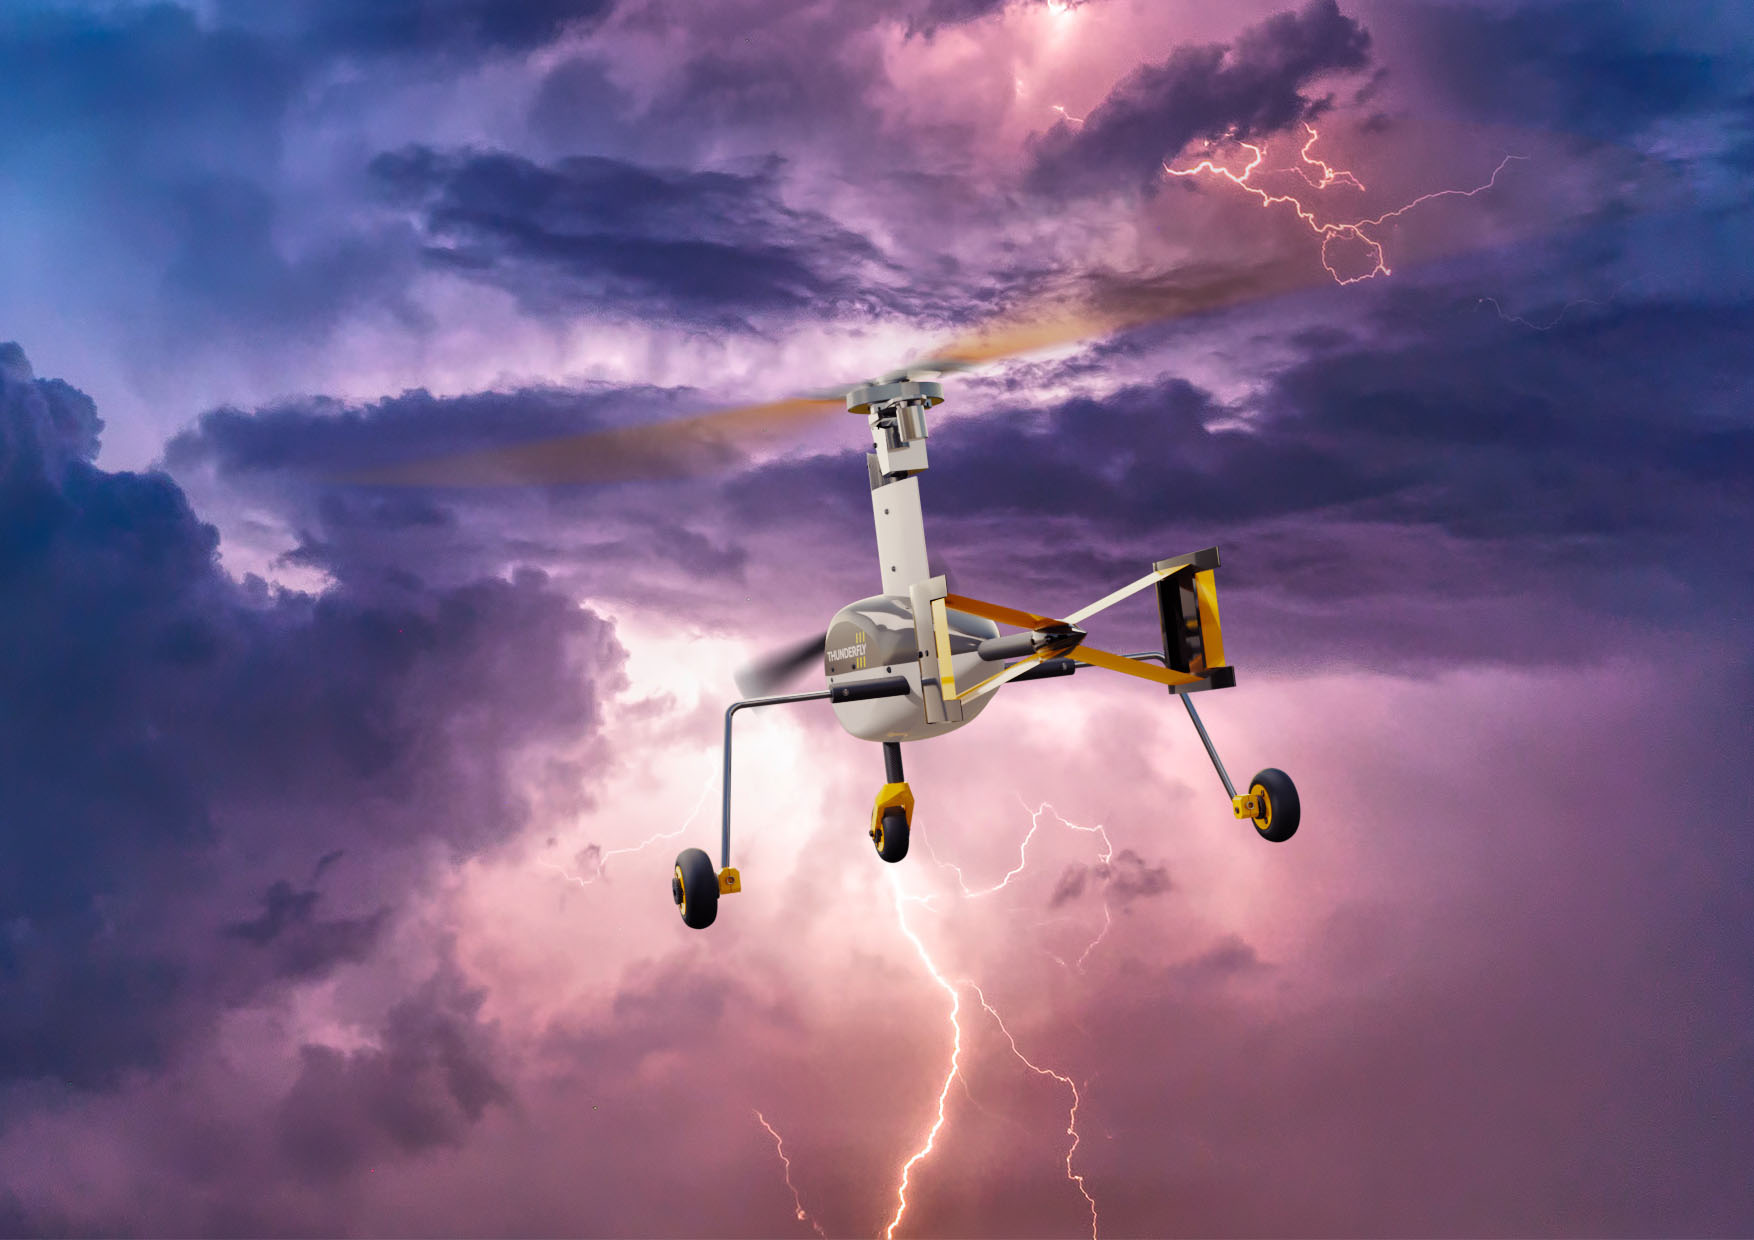 The TF-G1 is designed to withstand thunderstorms